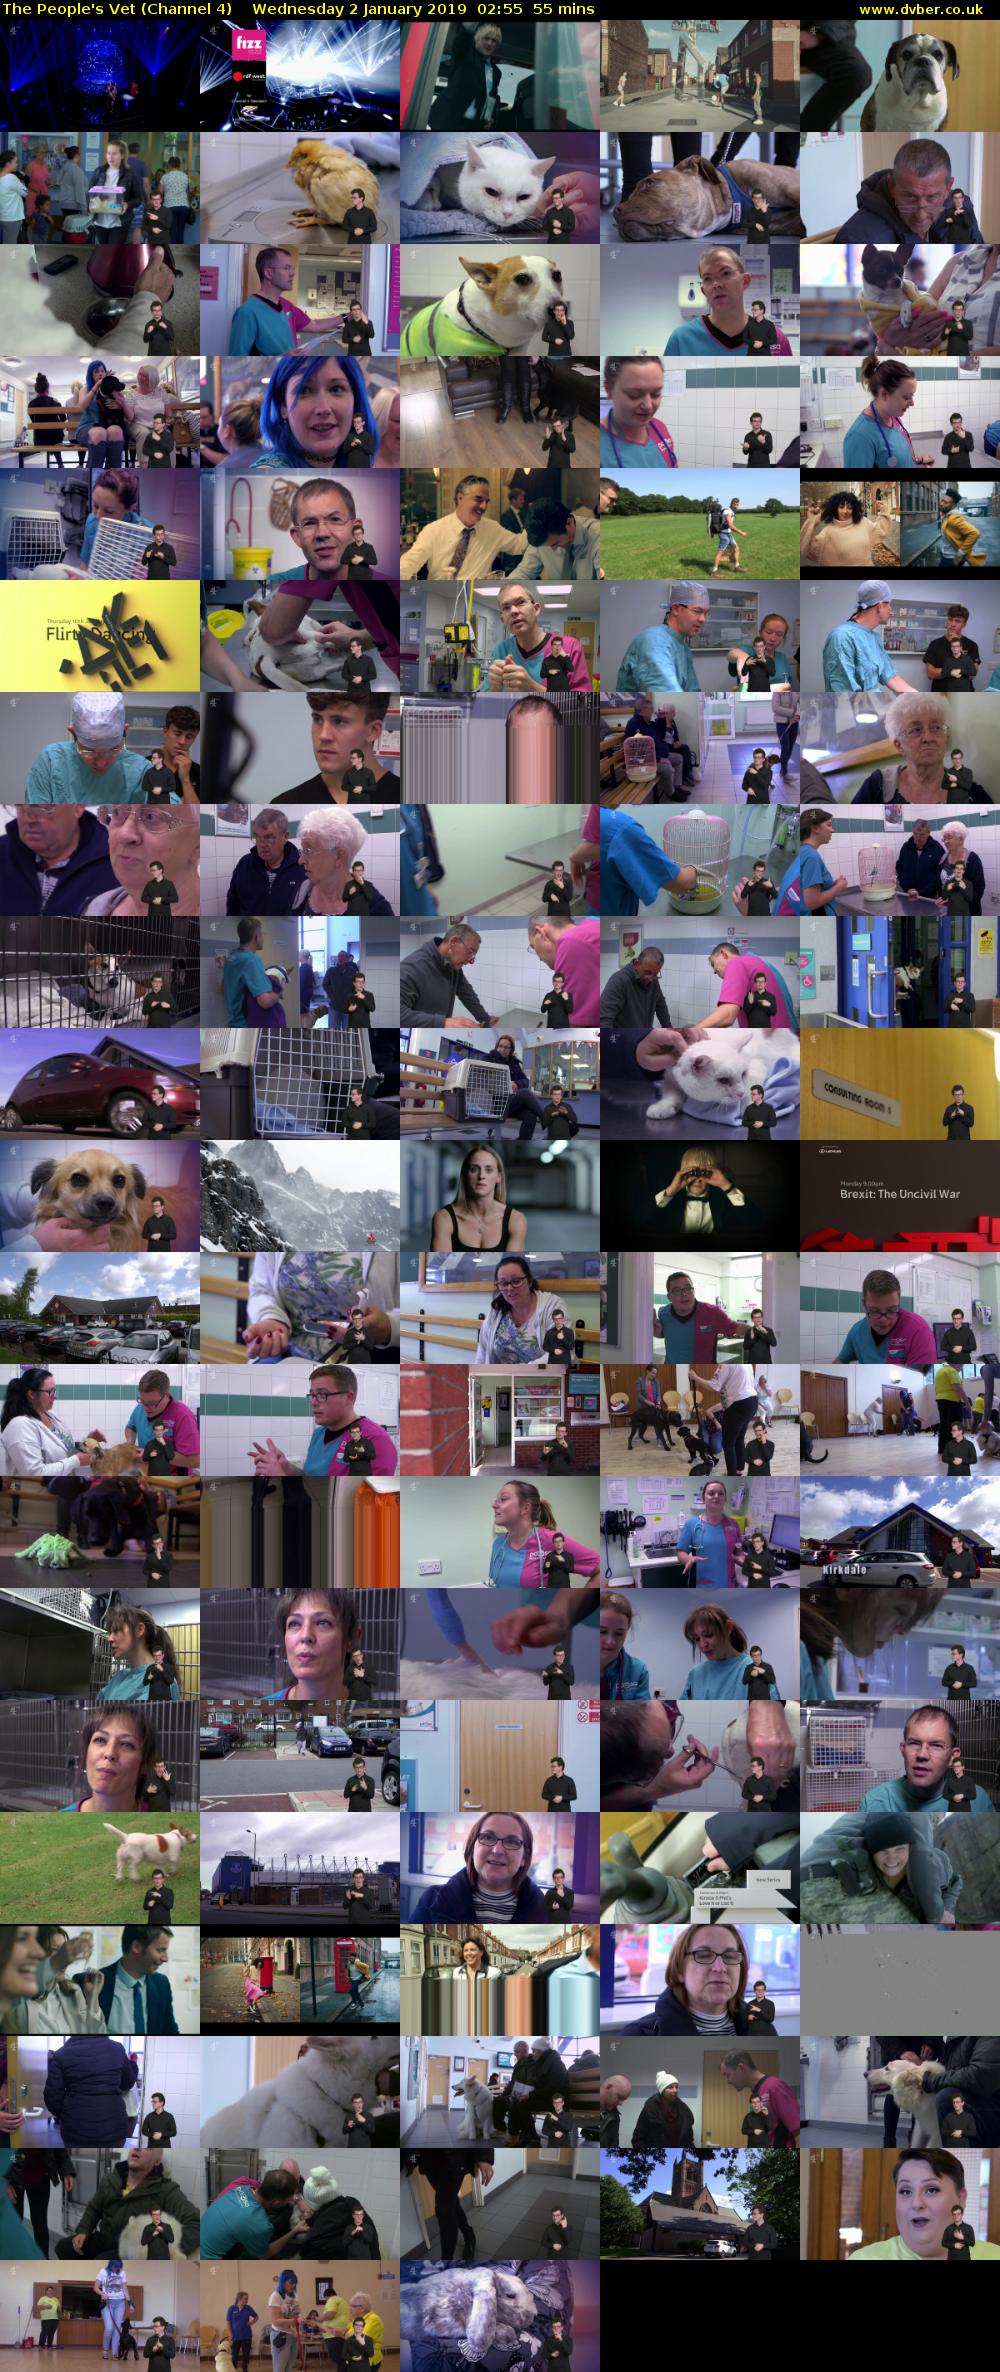 The People's Vet (Channel 4) Wednesday 2 January 2019 02:55 - 03:50